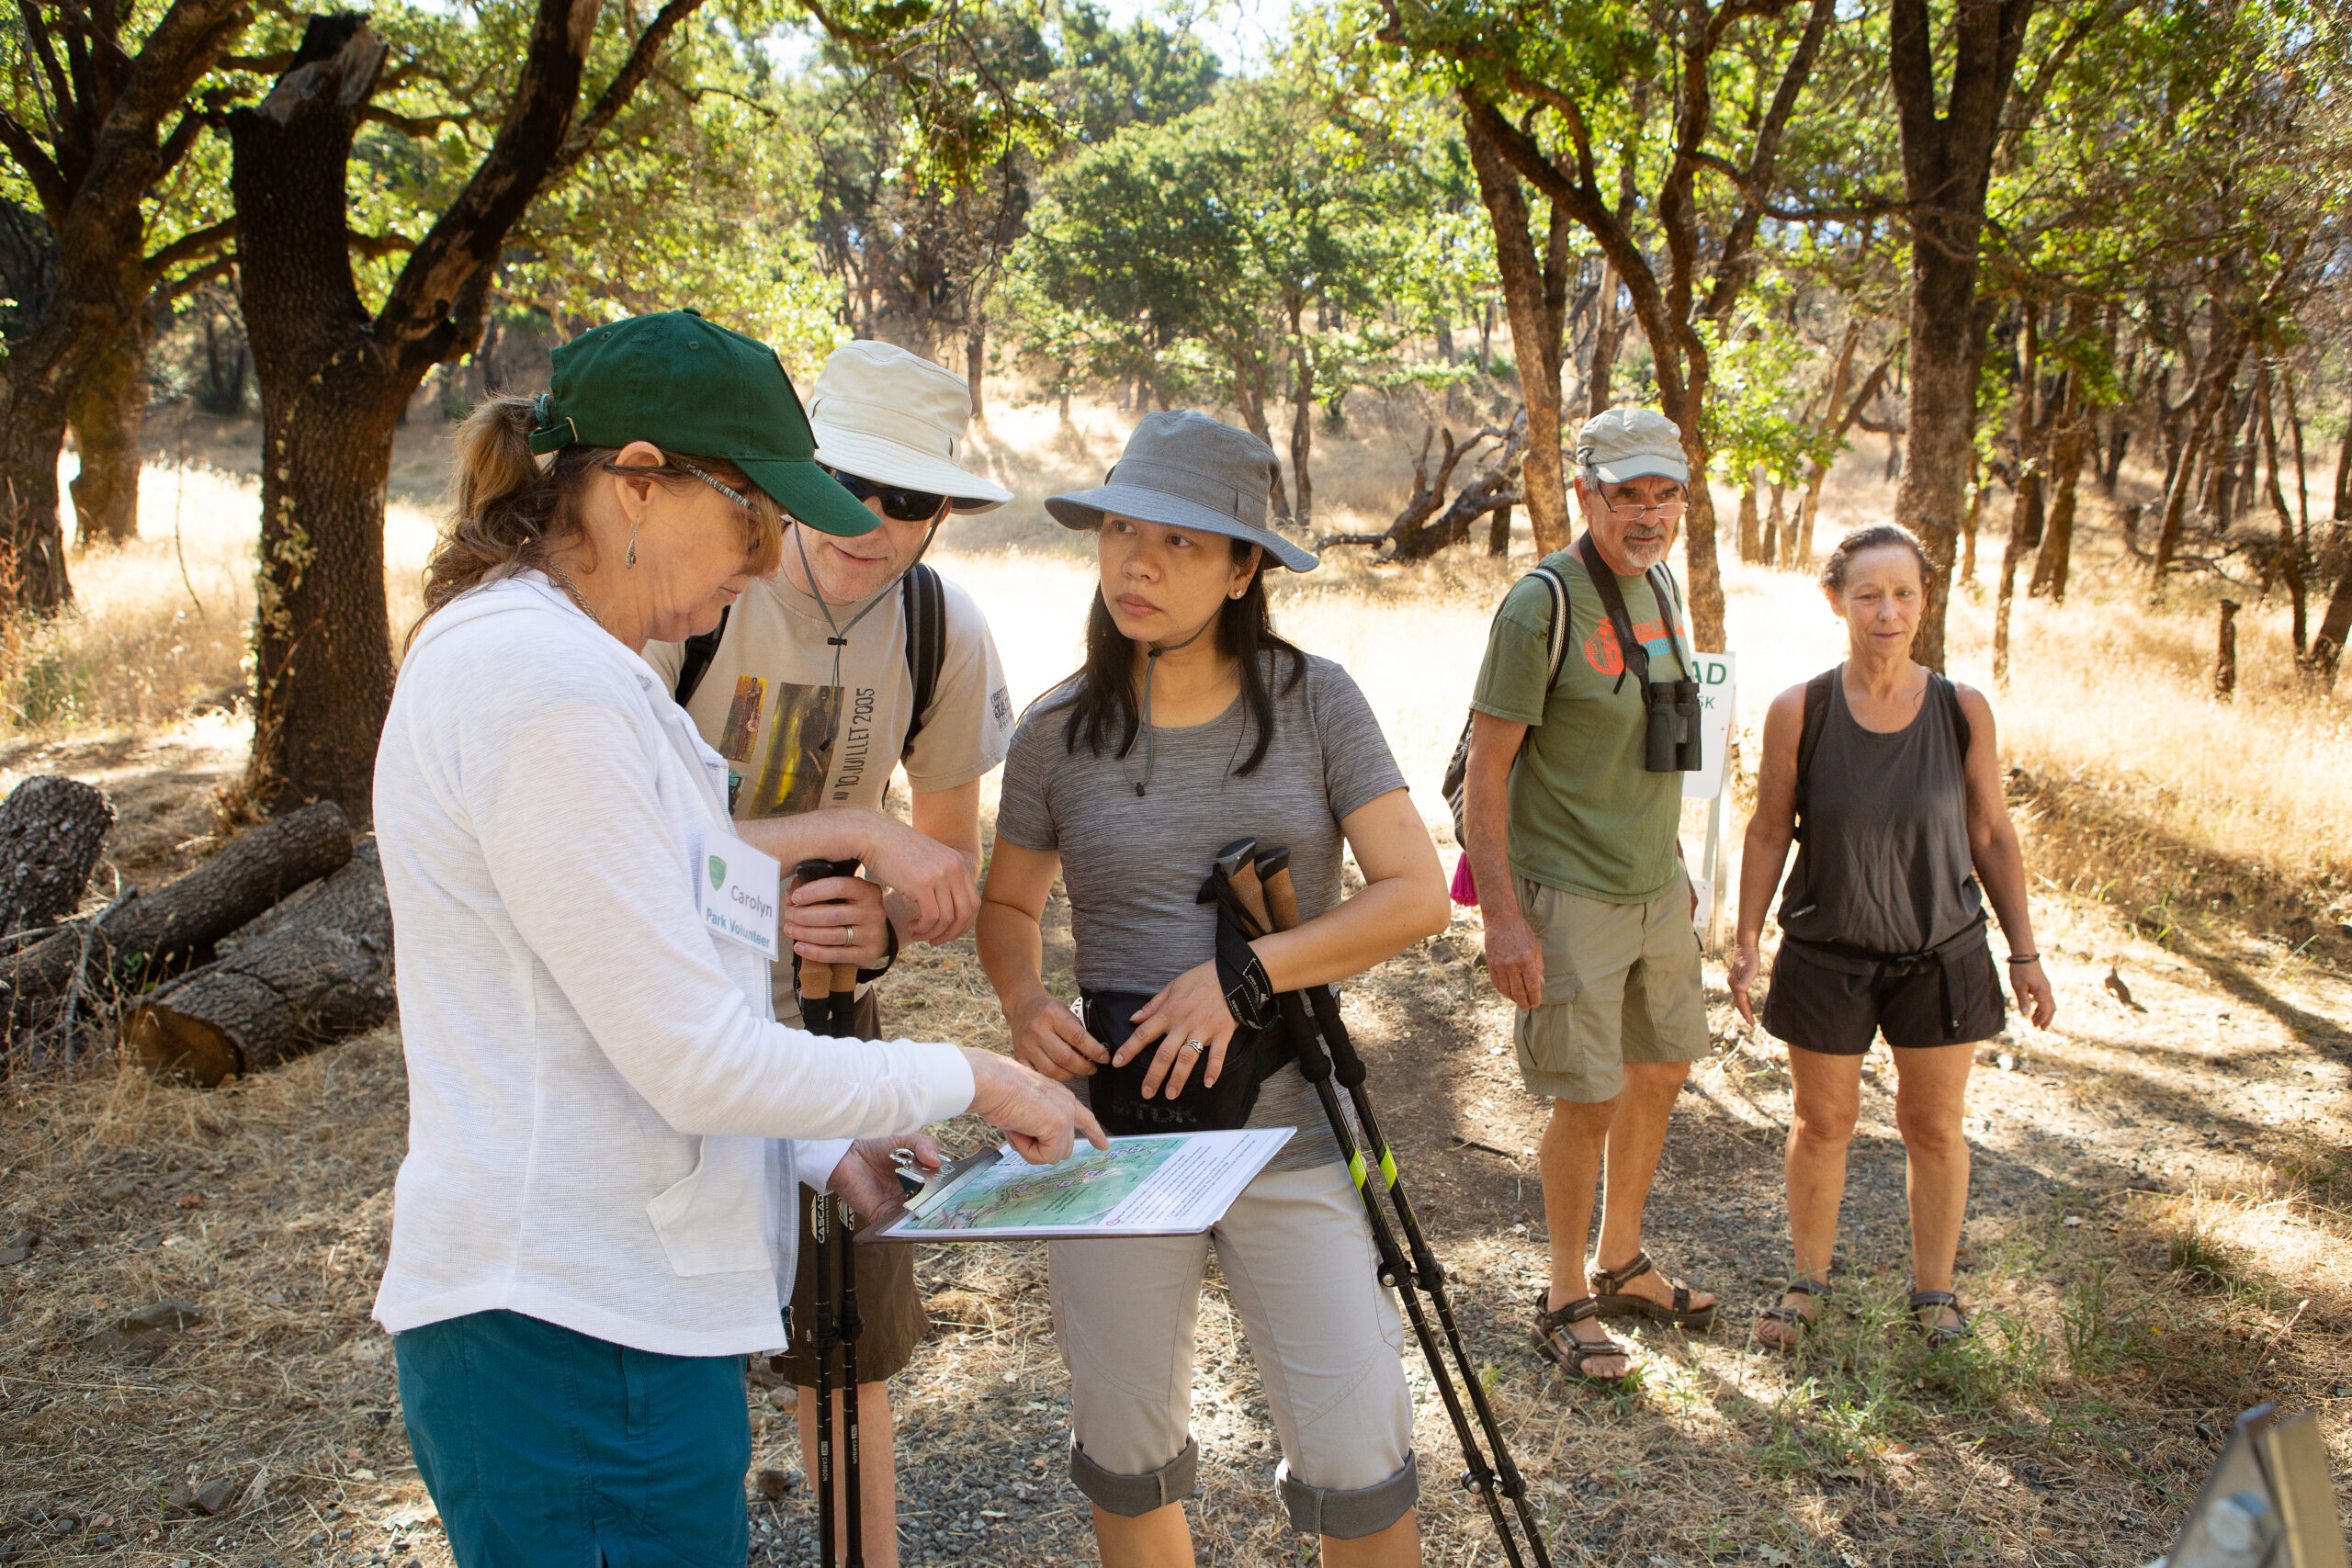 A volunteer for Sonoma County Regional Parks and a park visitor look at a map together while standing on a trail.